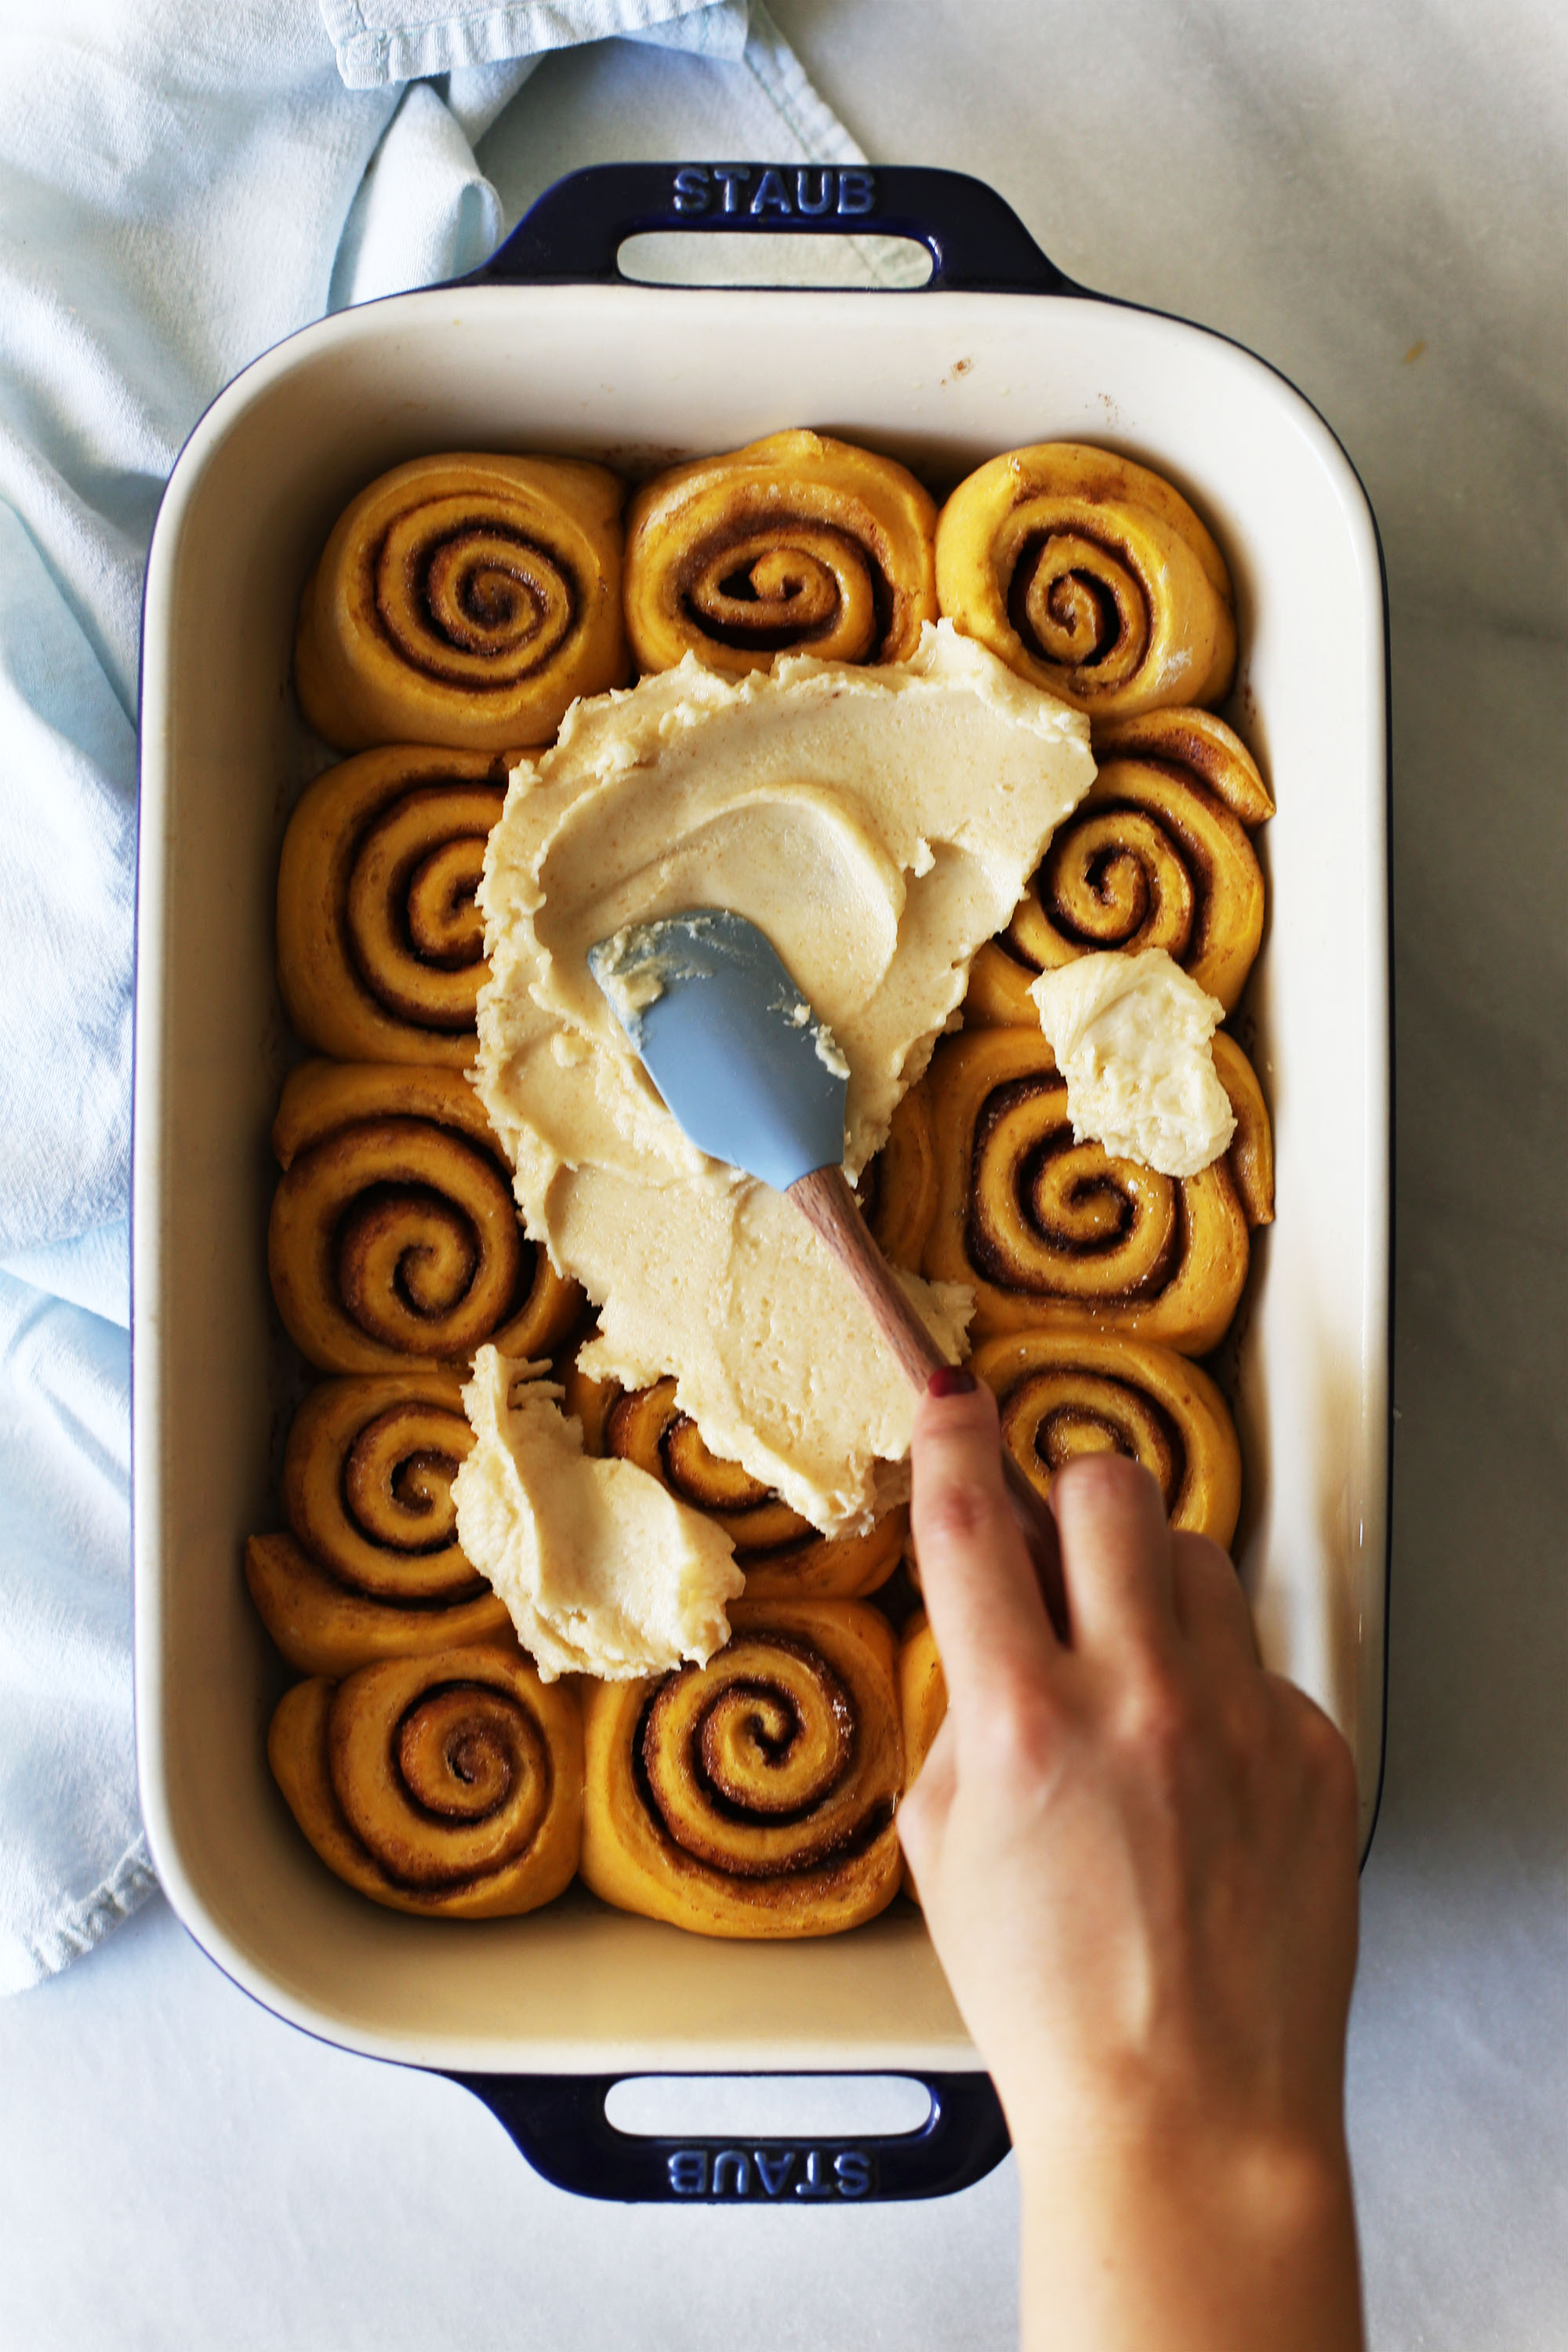 Pumpkin Cinnamon Rolls and Browned Butter Frosting